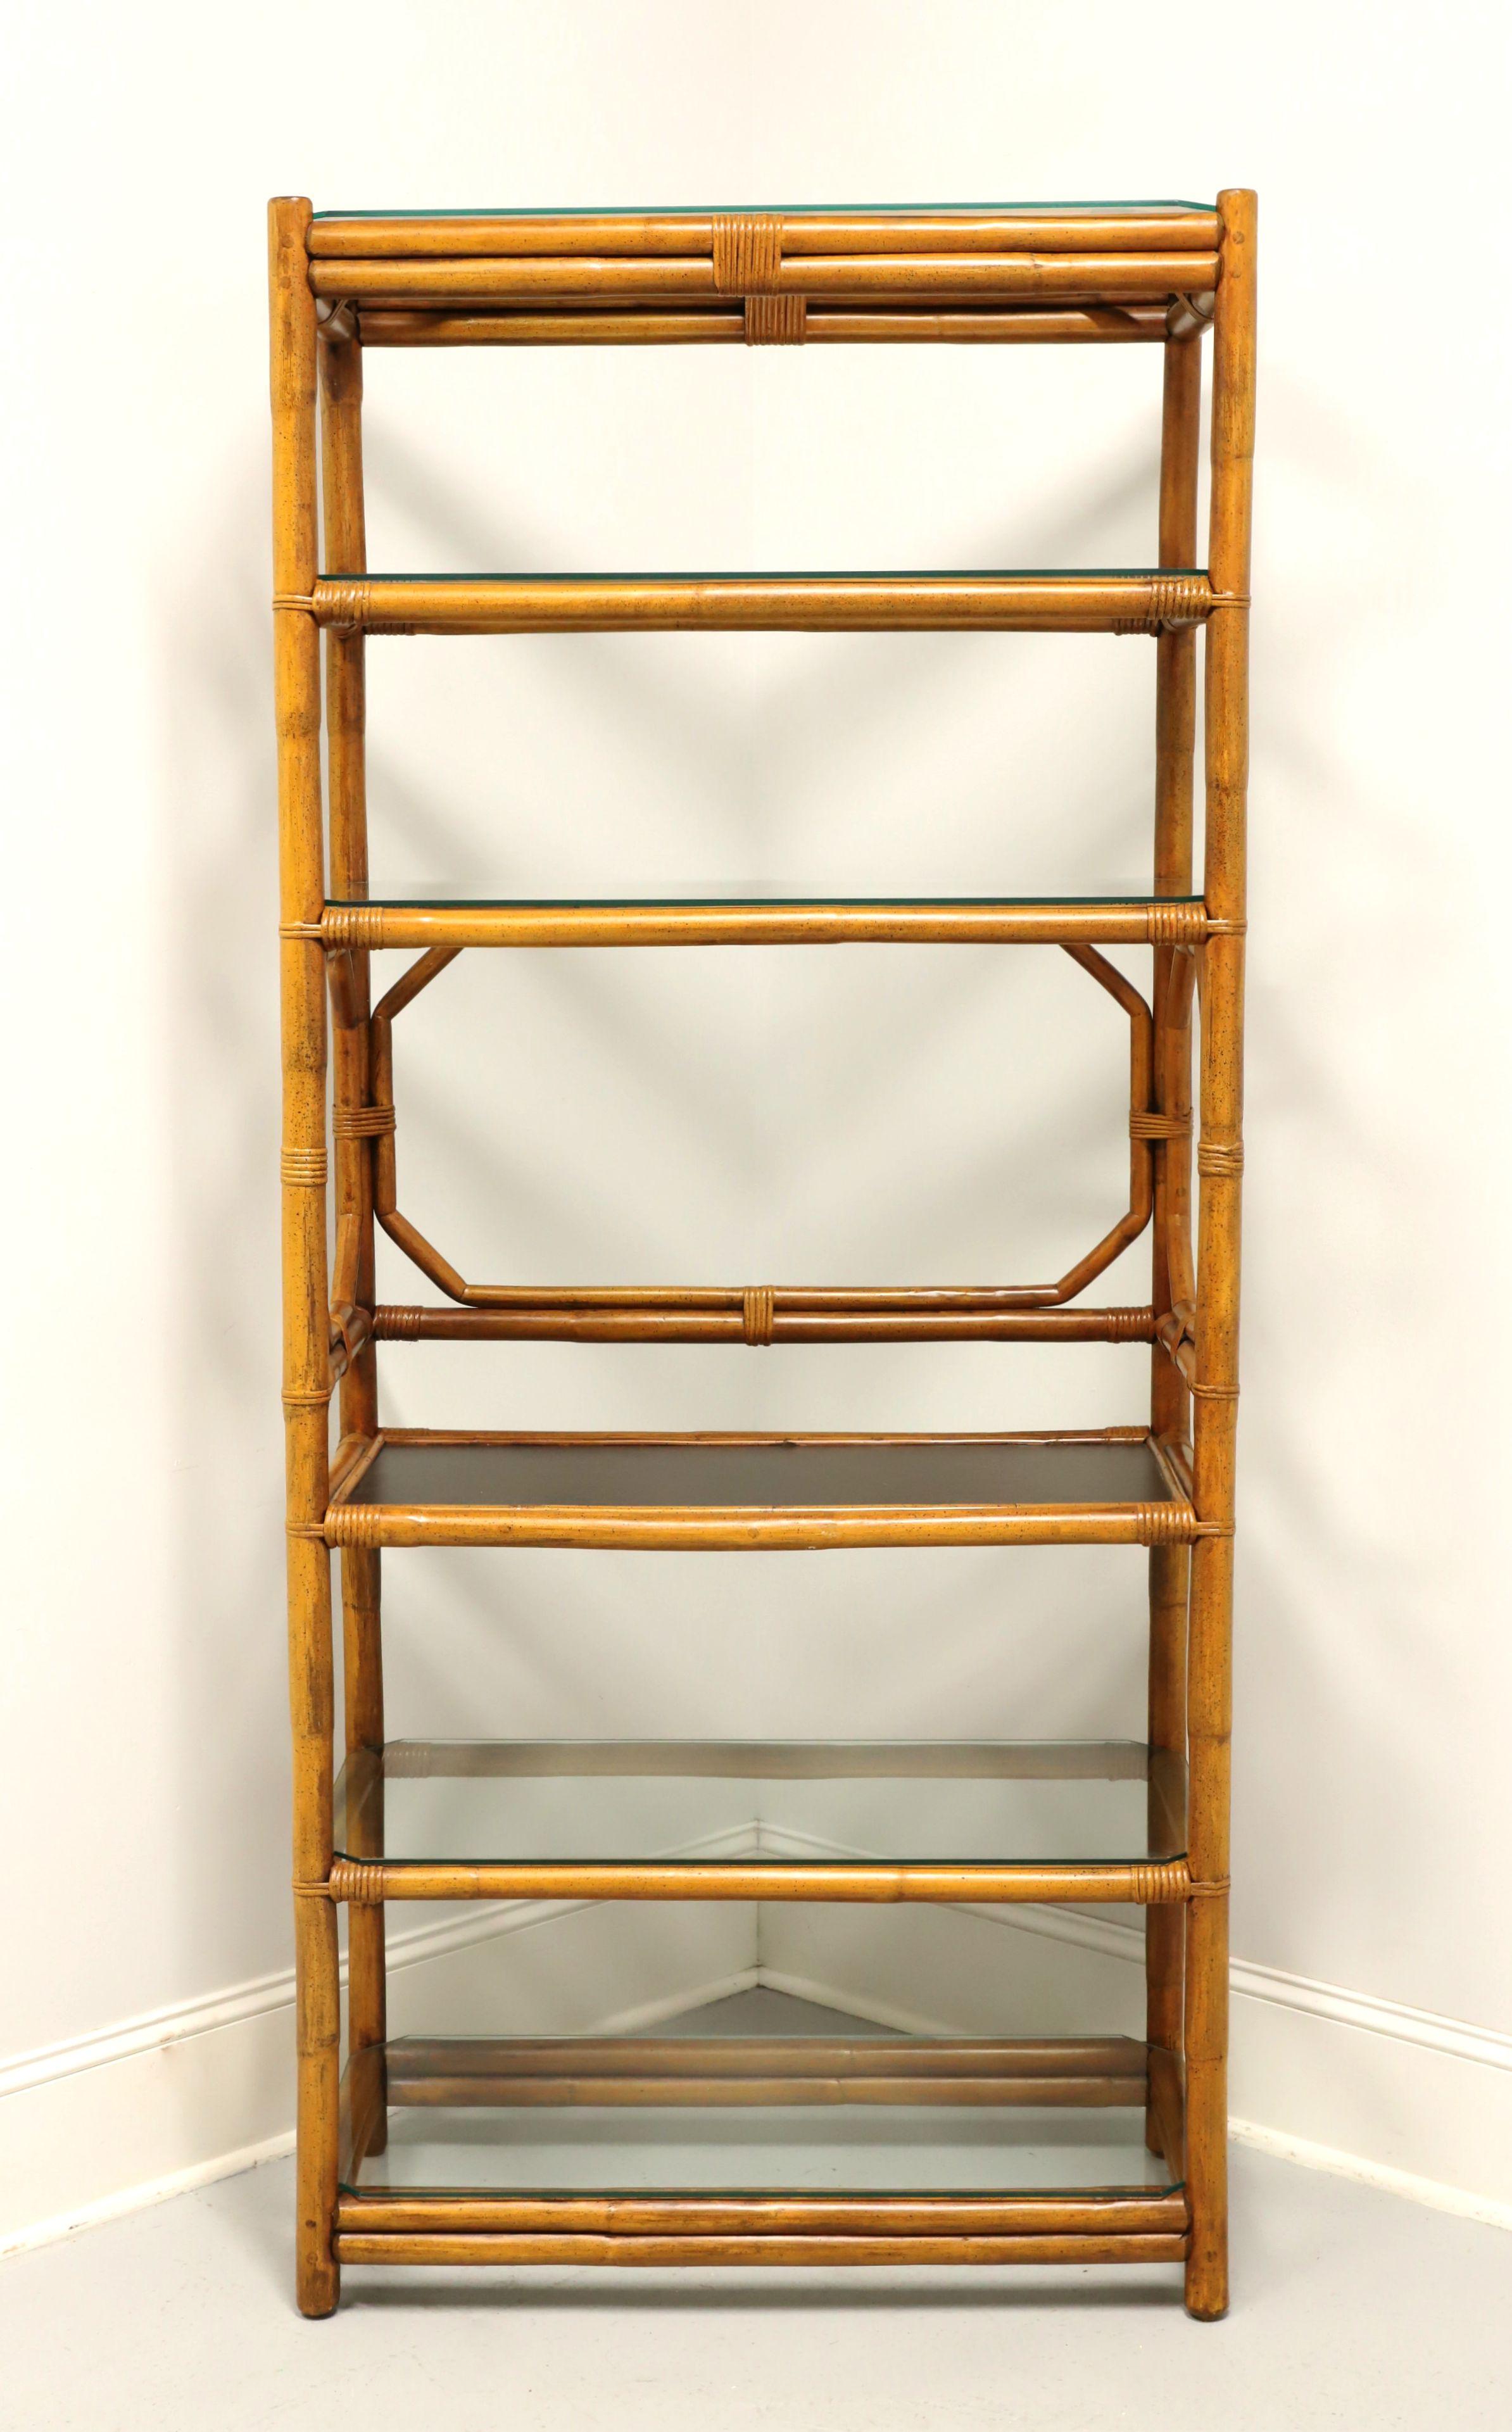 A Coastal style etagere / shelving unit by Ficks Reed. Faux bamboo with decorative open frame, rattan accent strapping and octagonal shaped accents to center. Features six fixed shelf areas, five with removable glass shelves including the top and